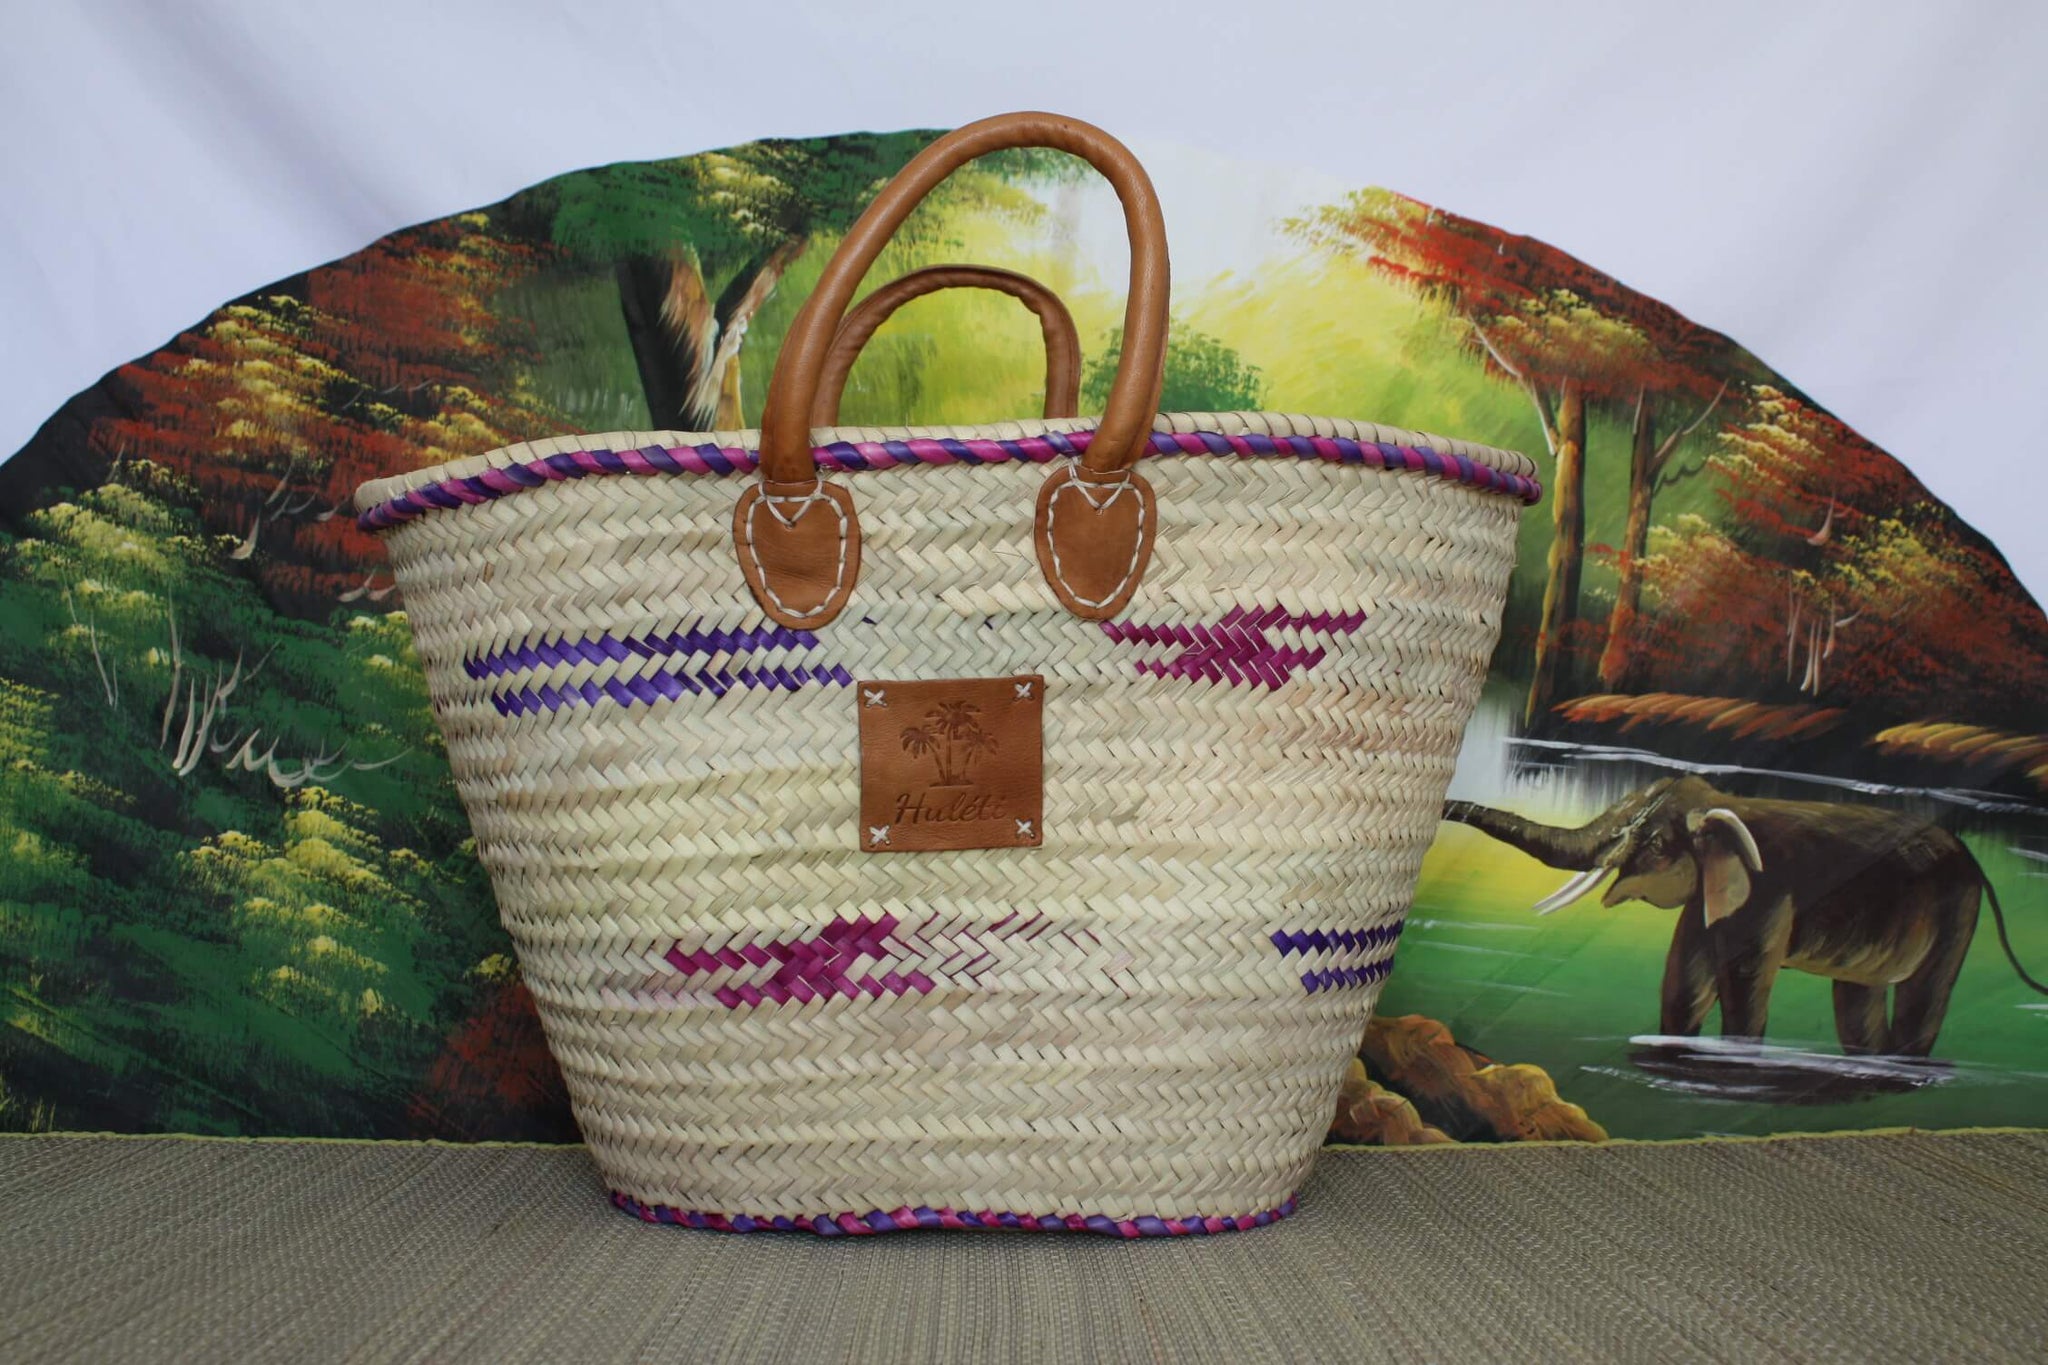 LARGE Bag Reinforced Handles Leather - Colorful Basket Tote Bag Couffin markets shopping beach wicker rattan natural palm tree